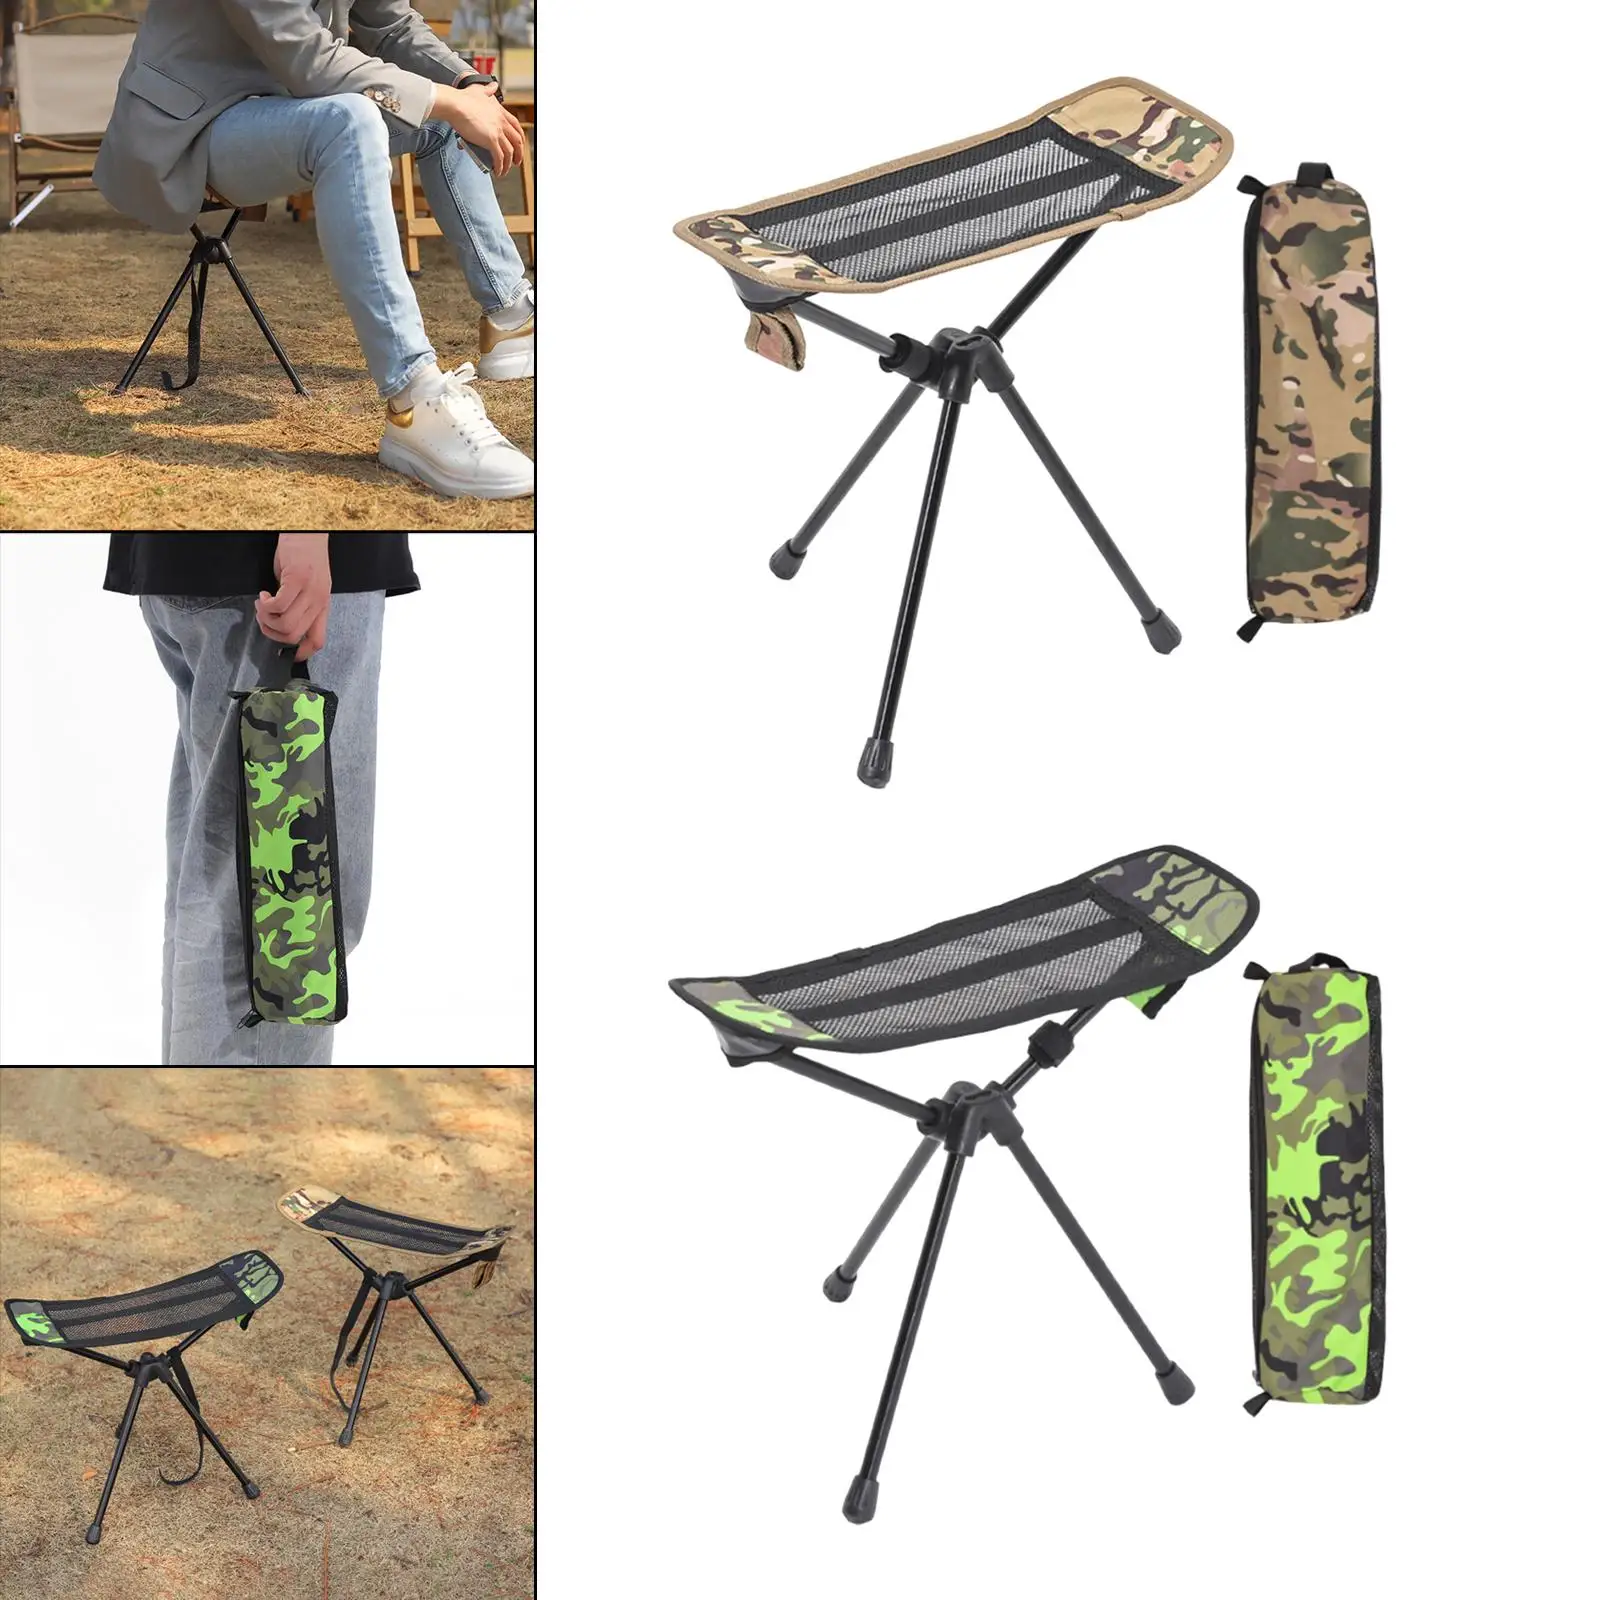 Collapsible Footstool with Carry Bag Folding Chair Seat Stool recliner Foot Rest for Fishing BBQ Travel Camping Picnic